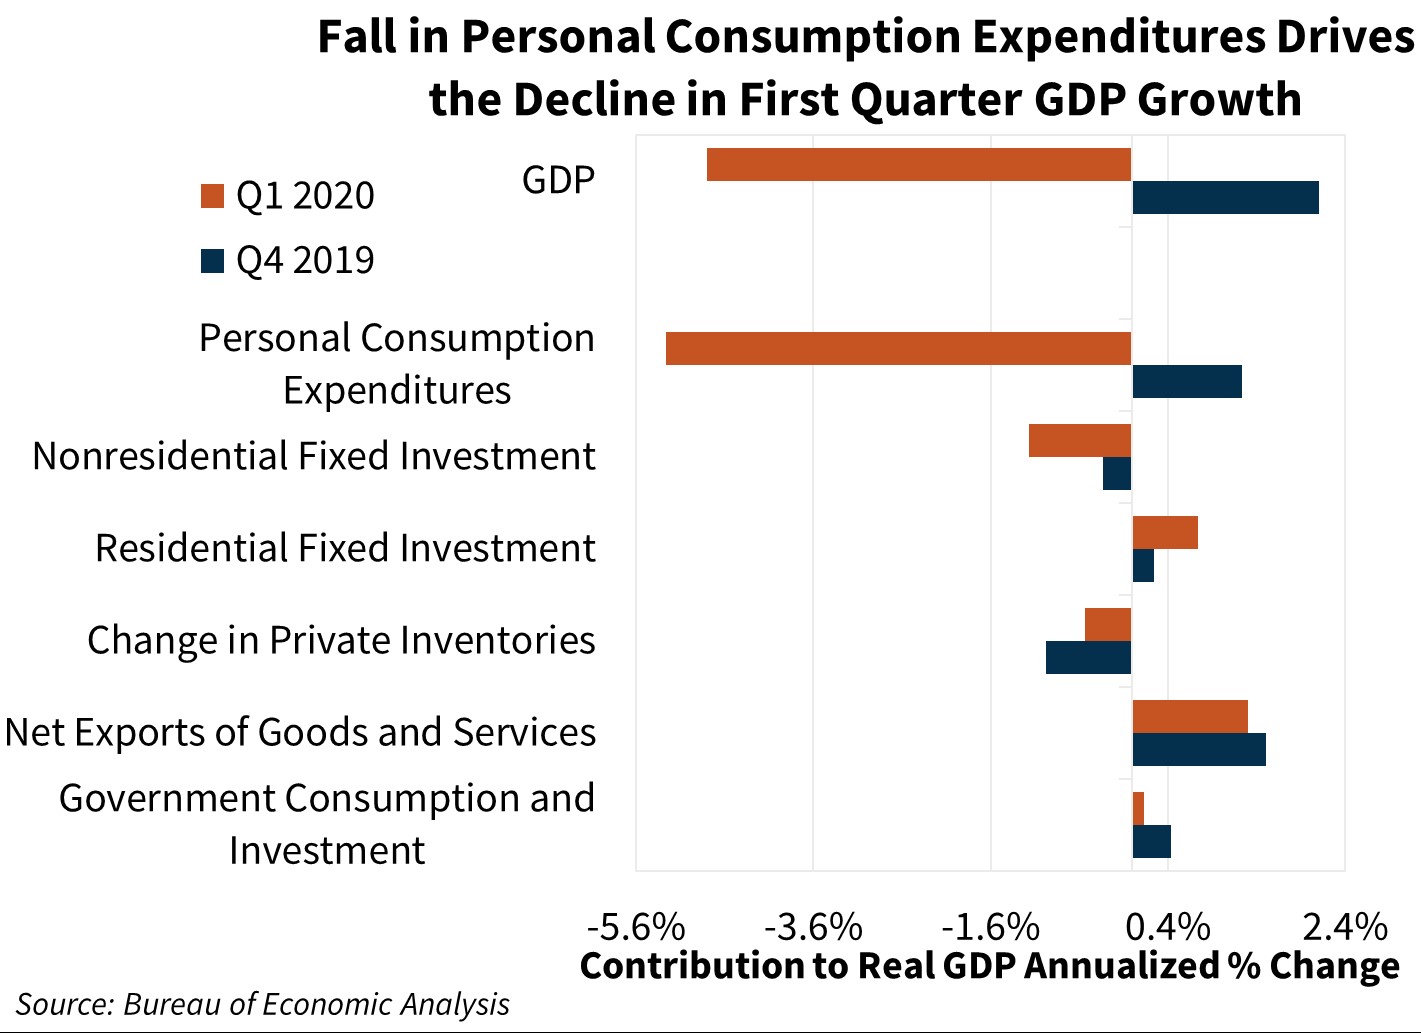 Fall in Personal Consumption Expenditures Drives the Decline in the First Quarter GDP Growth